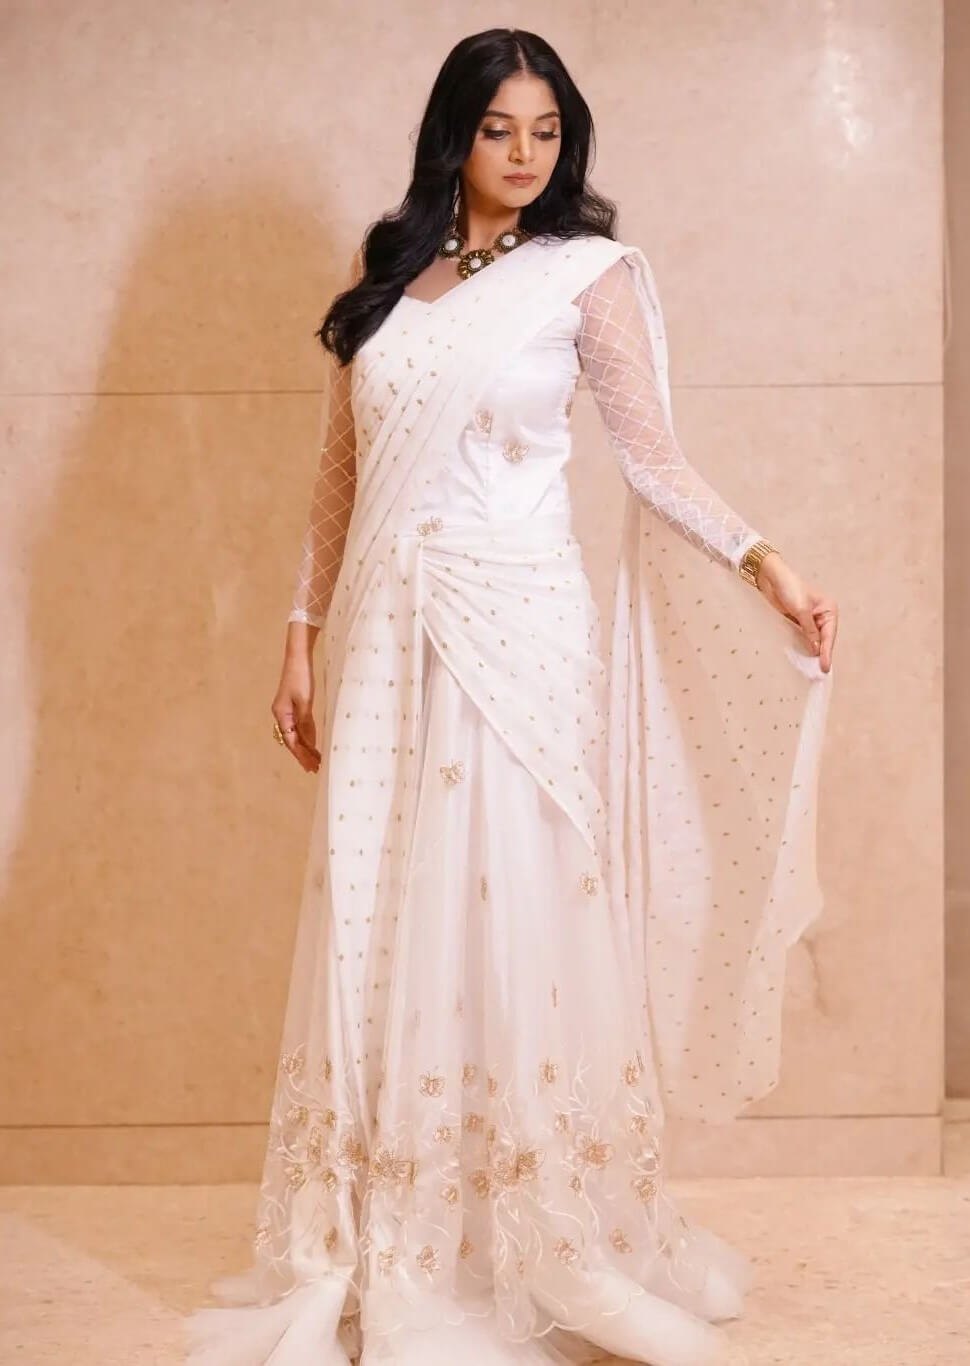 Sanam Shetty In White Chiffon Saree Paired With Full Sleeves Blouse